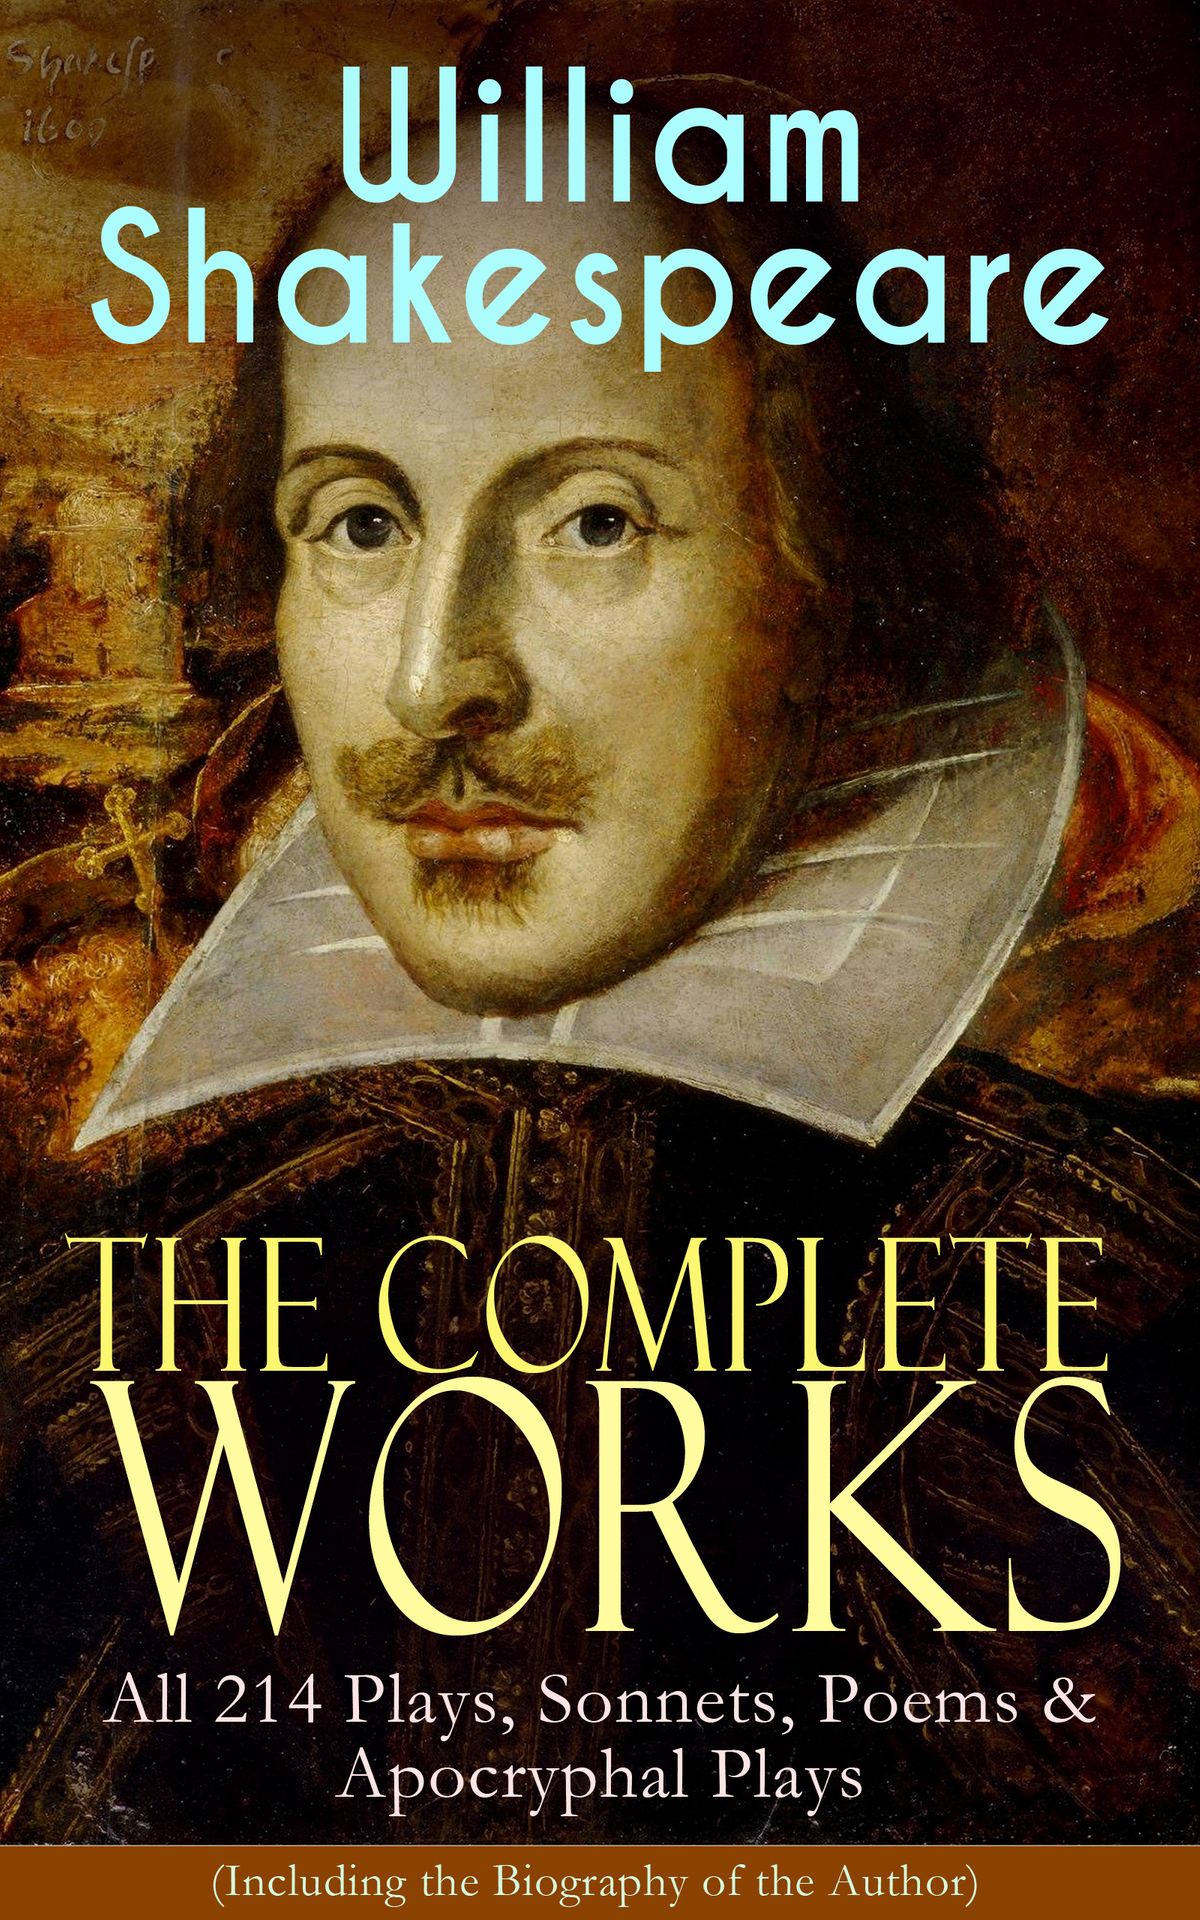 biography of shakespeare's works